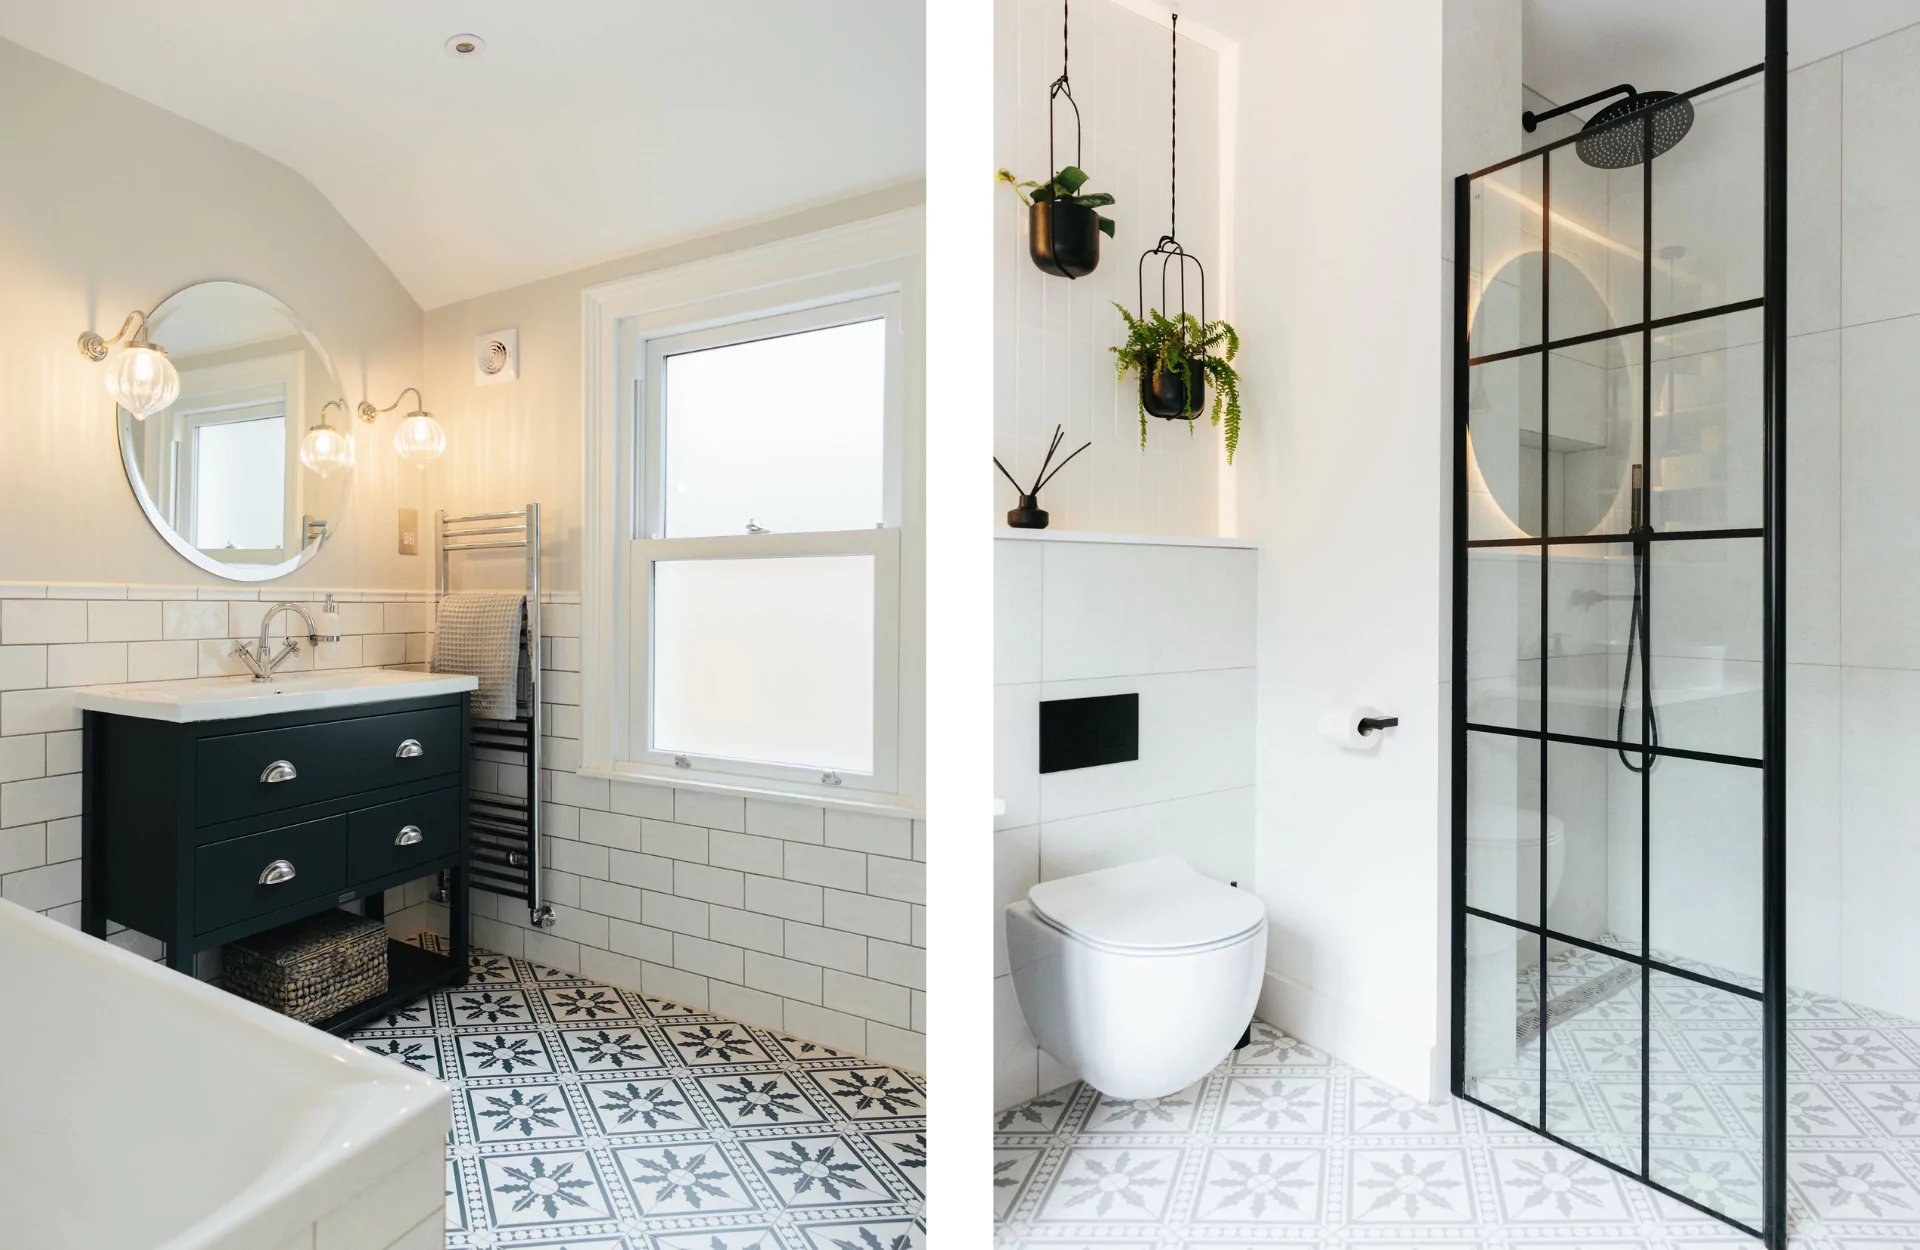 Monochrome bathroom with tile pattern